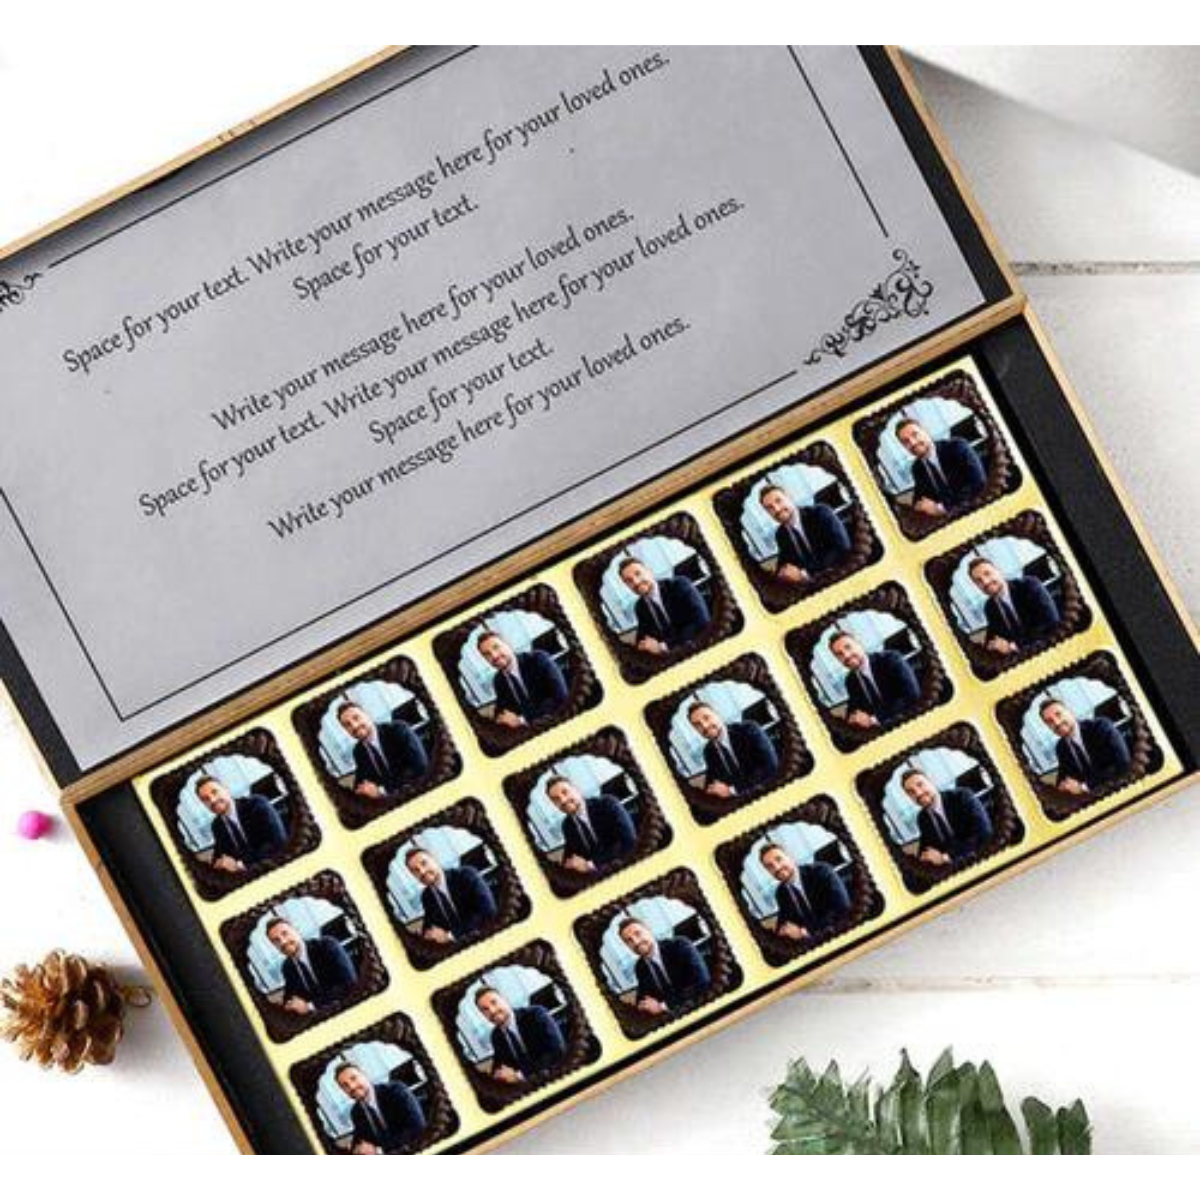 Best Customized Gifts with Personalised Message and Photo Chocolate